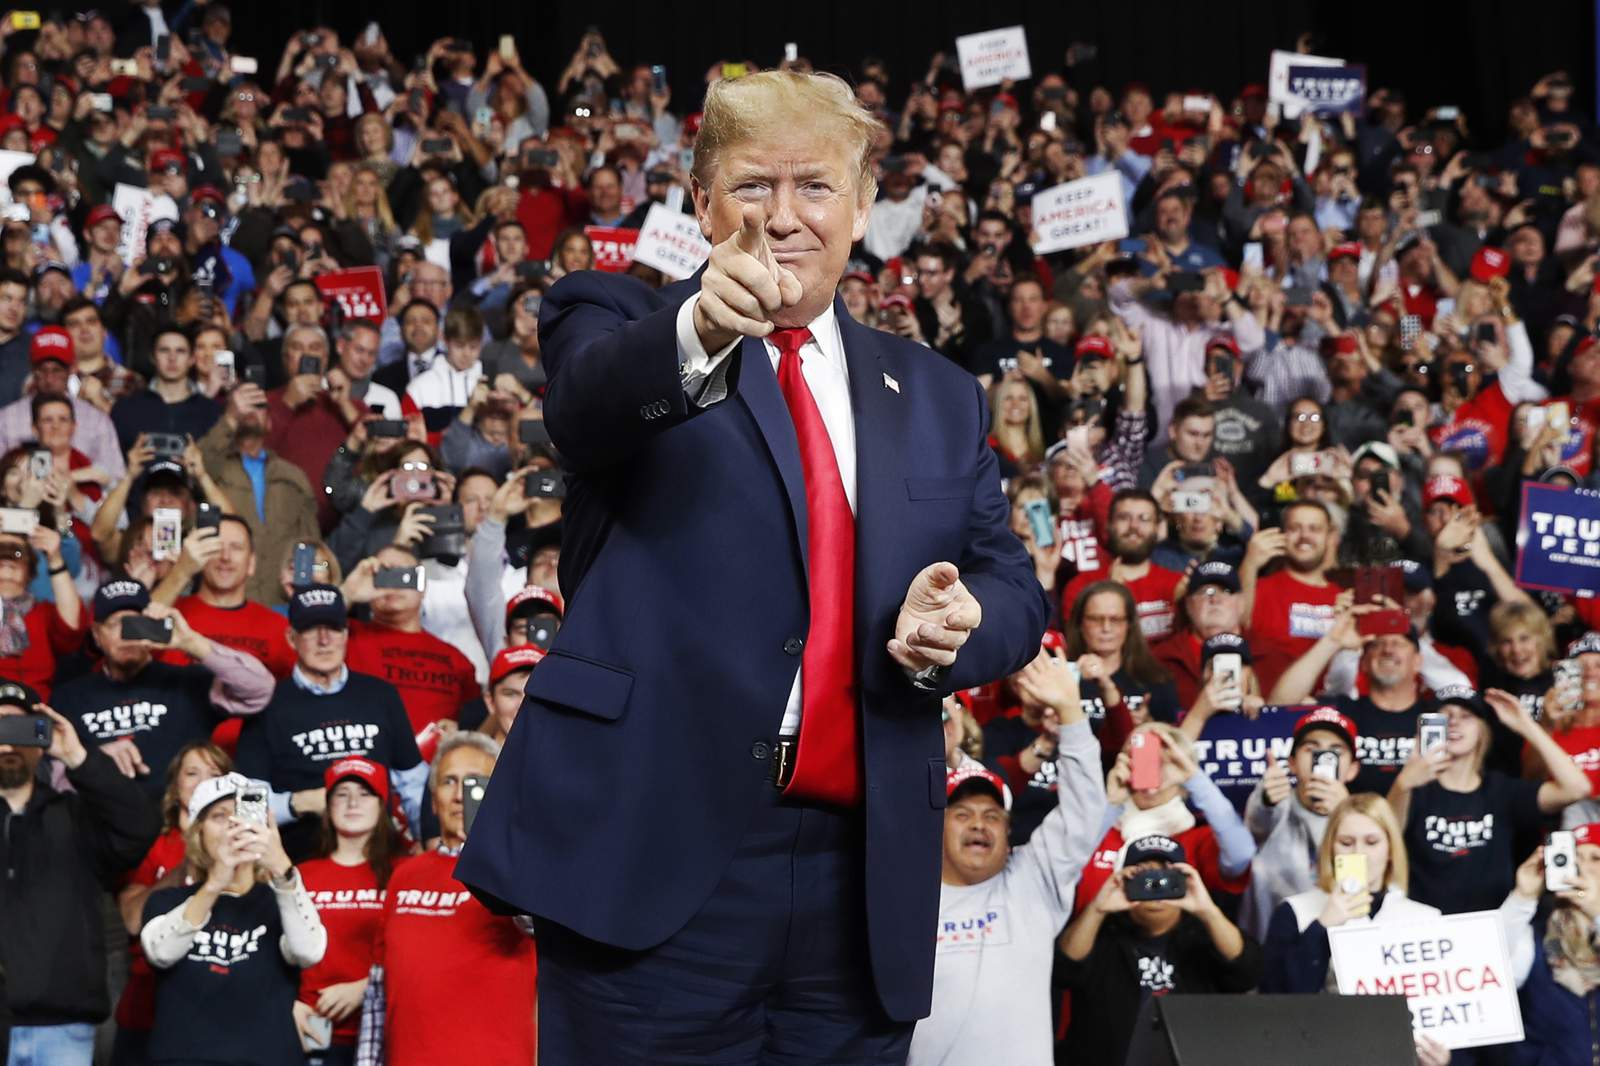 2020 Watch: Does Trump have a strategy to win in November?